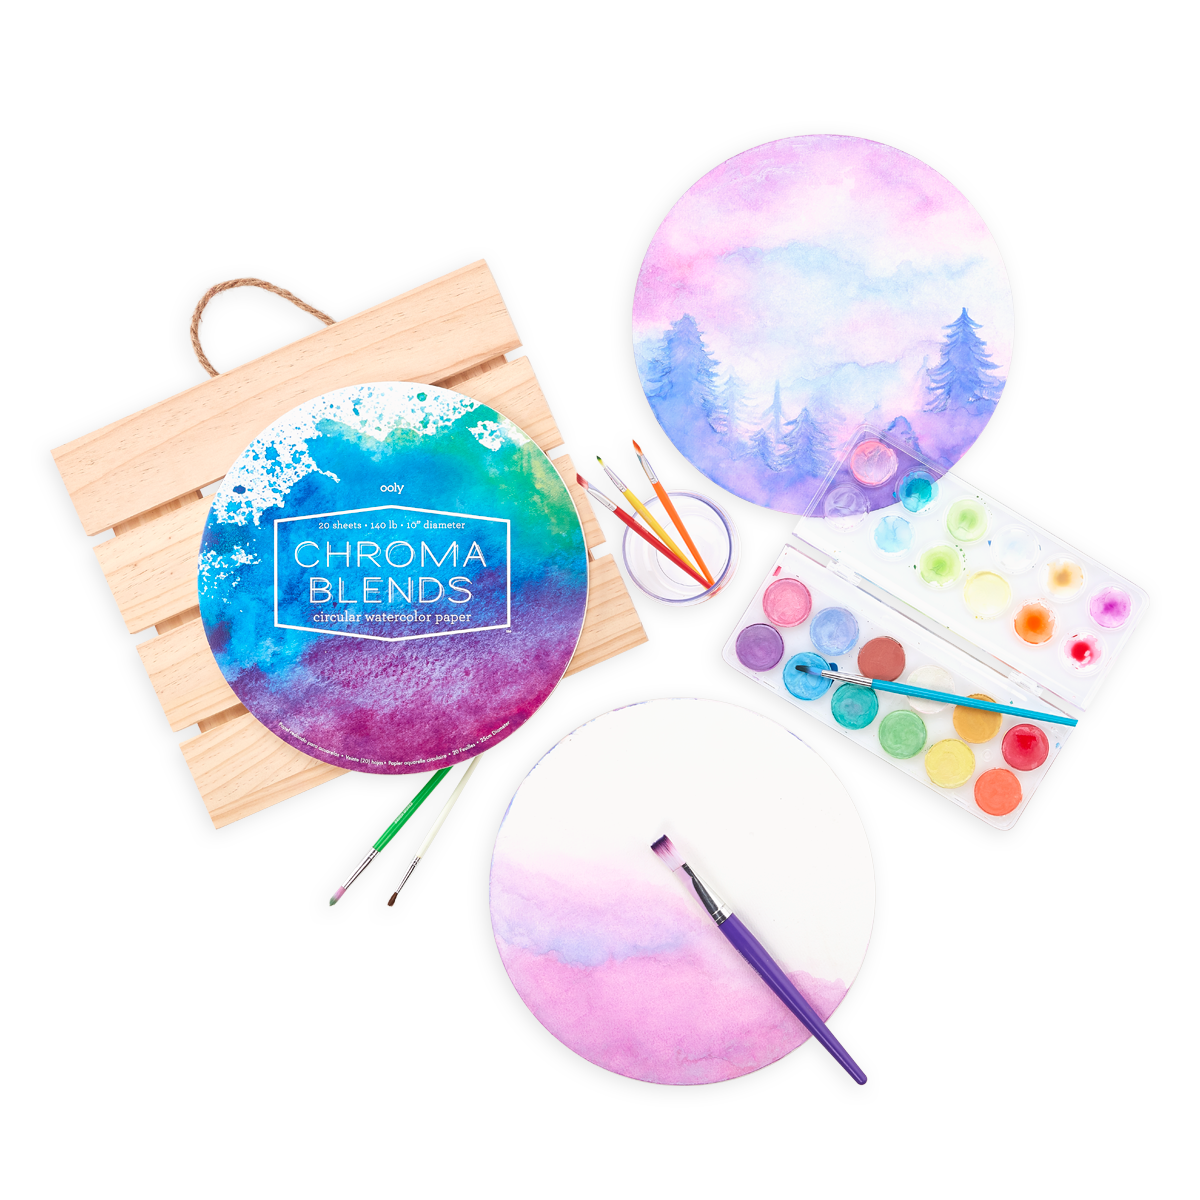 Chroma Blends Circular Watercolor Paper - OOLY